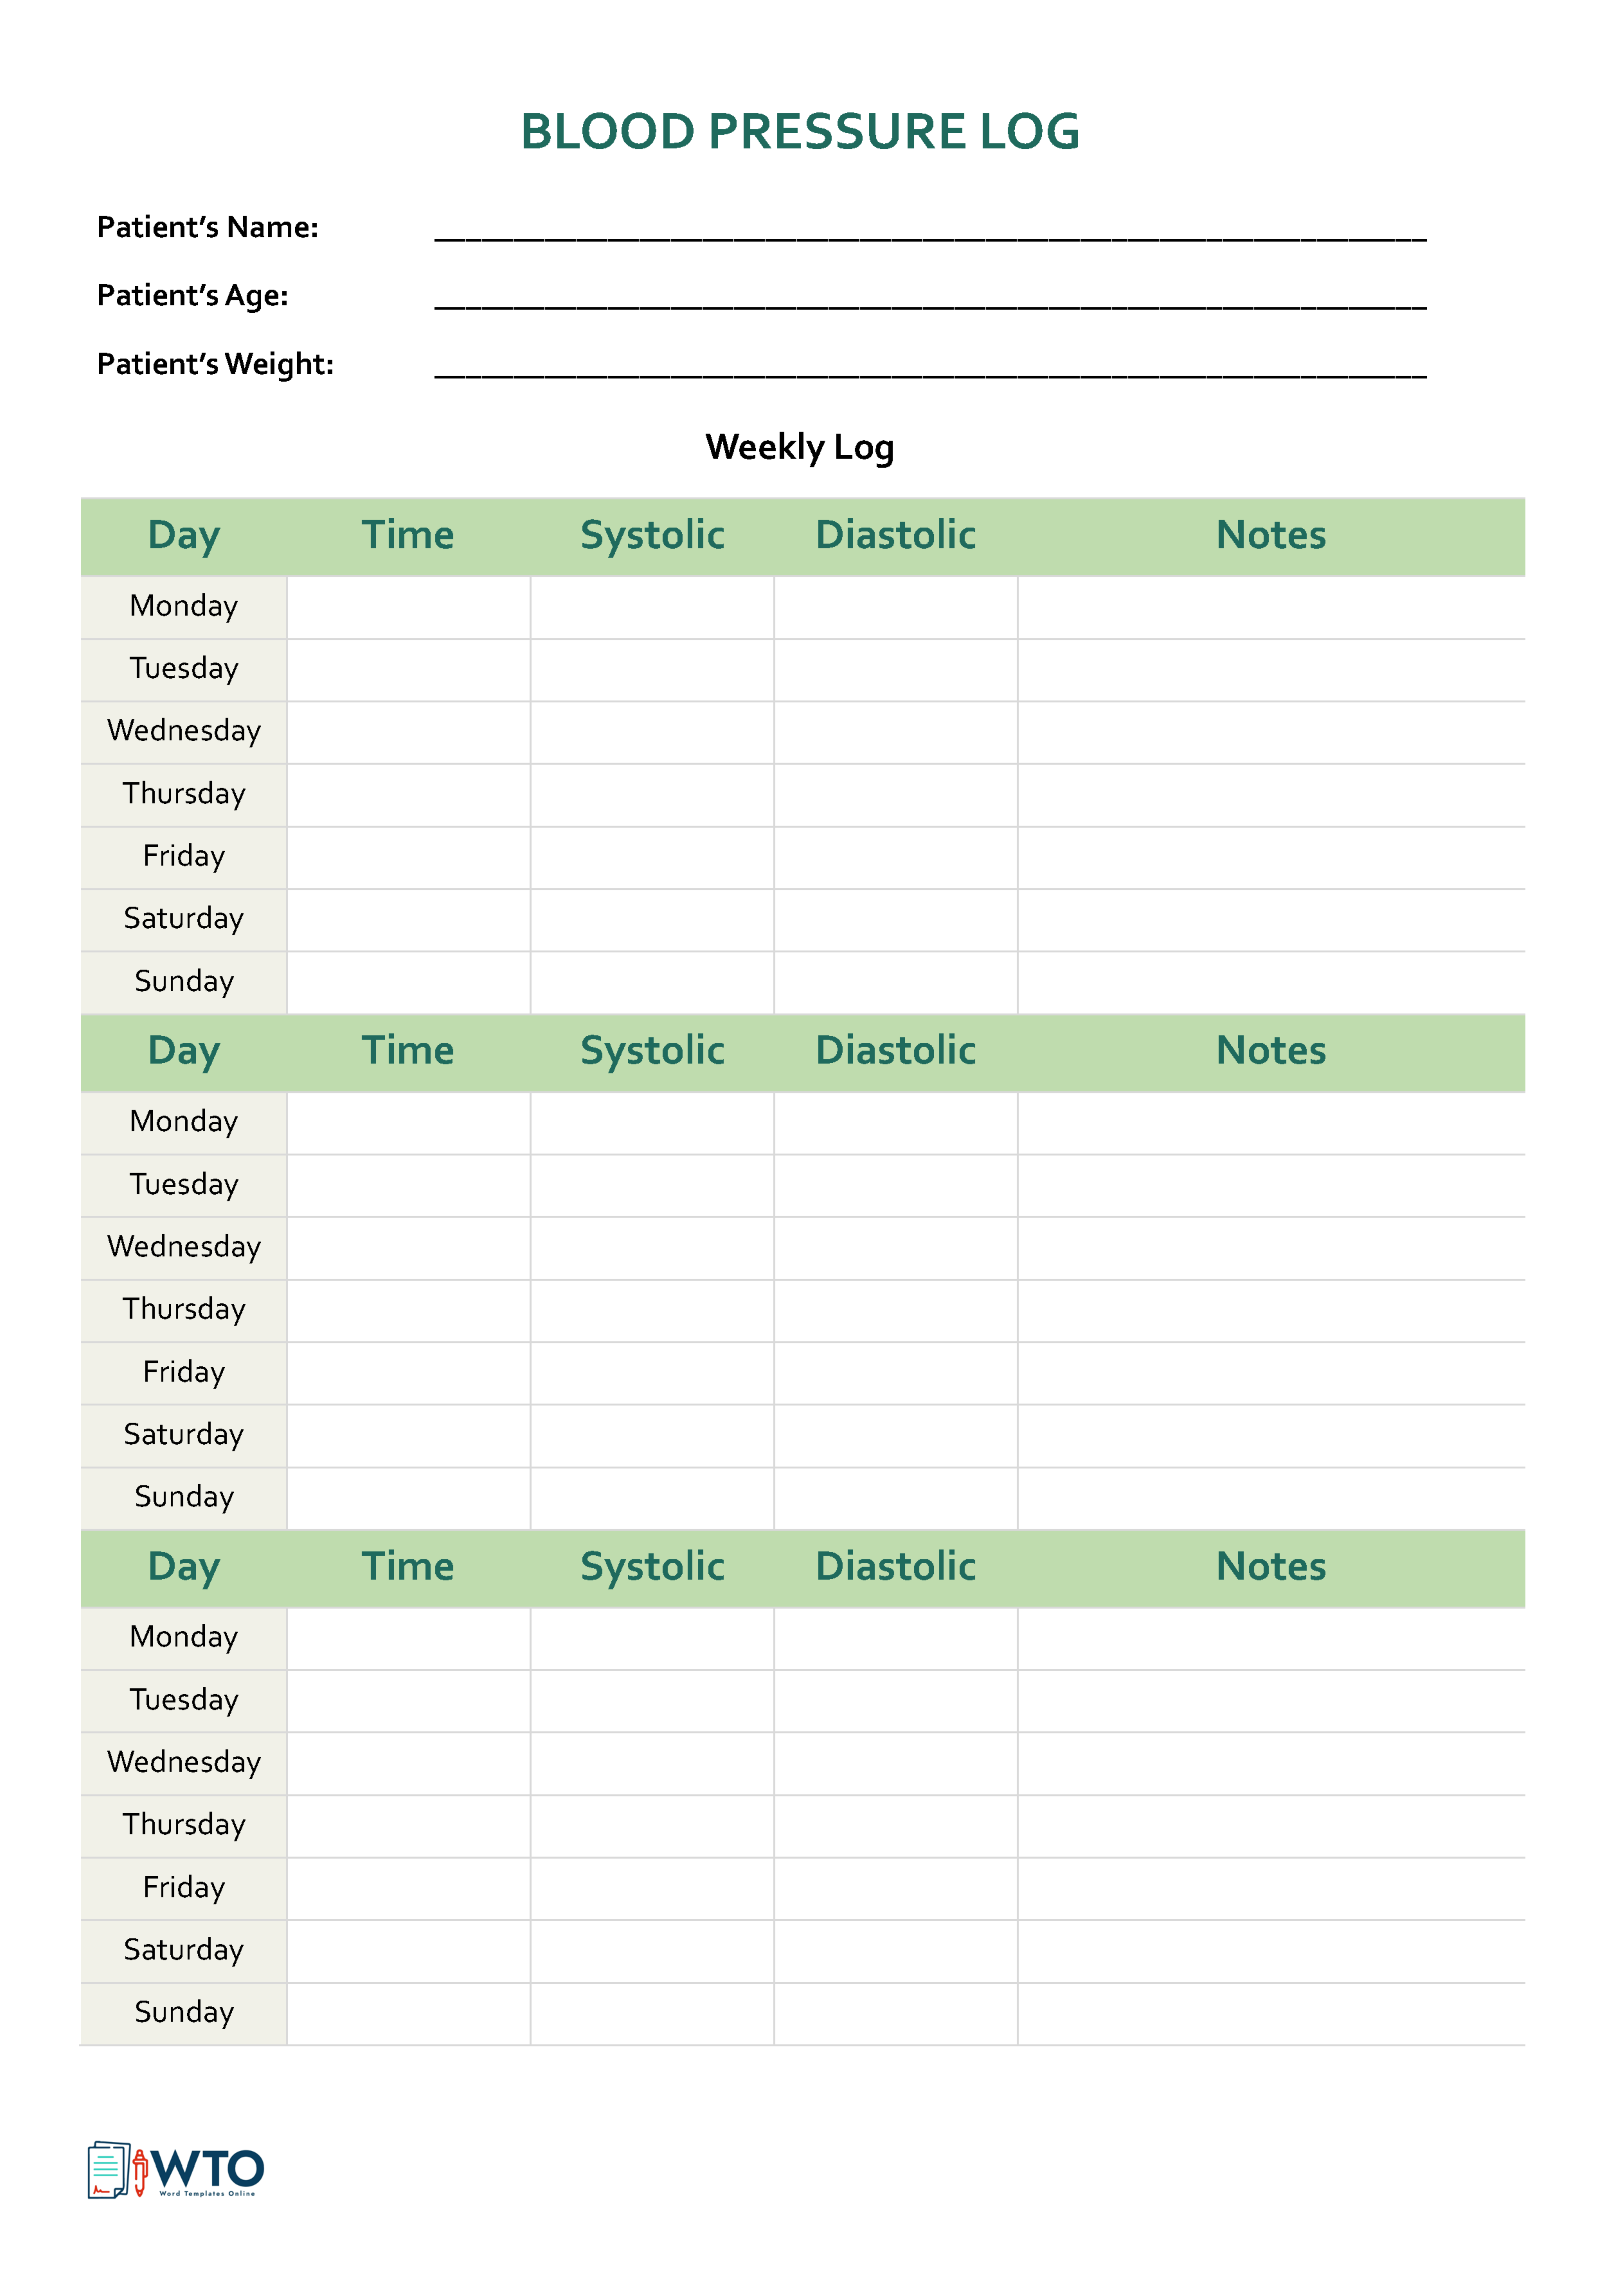 Free Blood Pressure Log Template: Download and Track